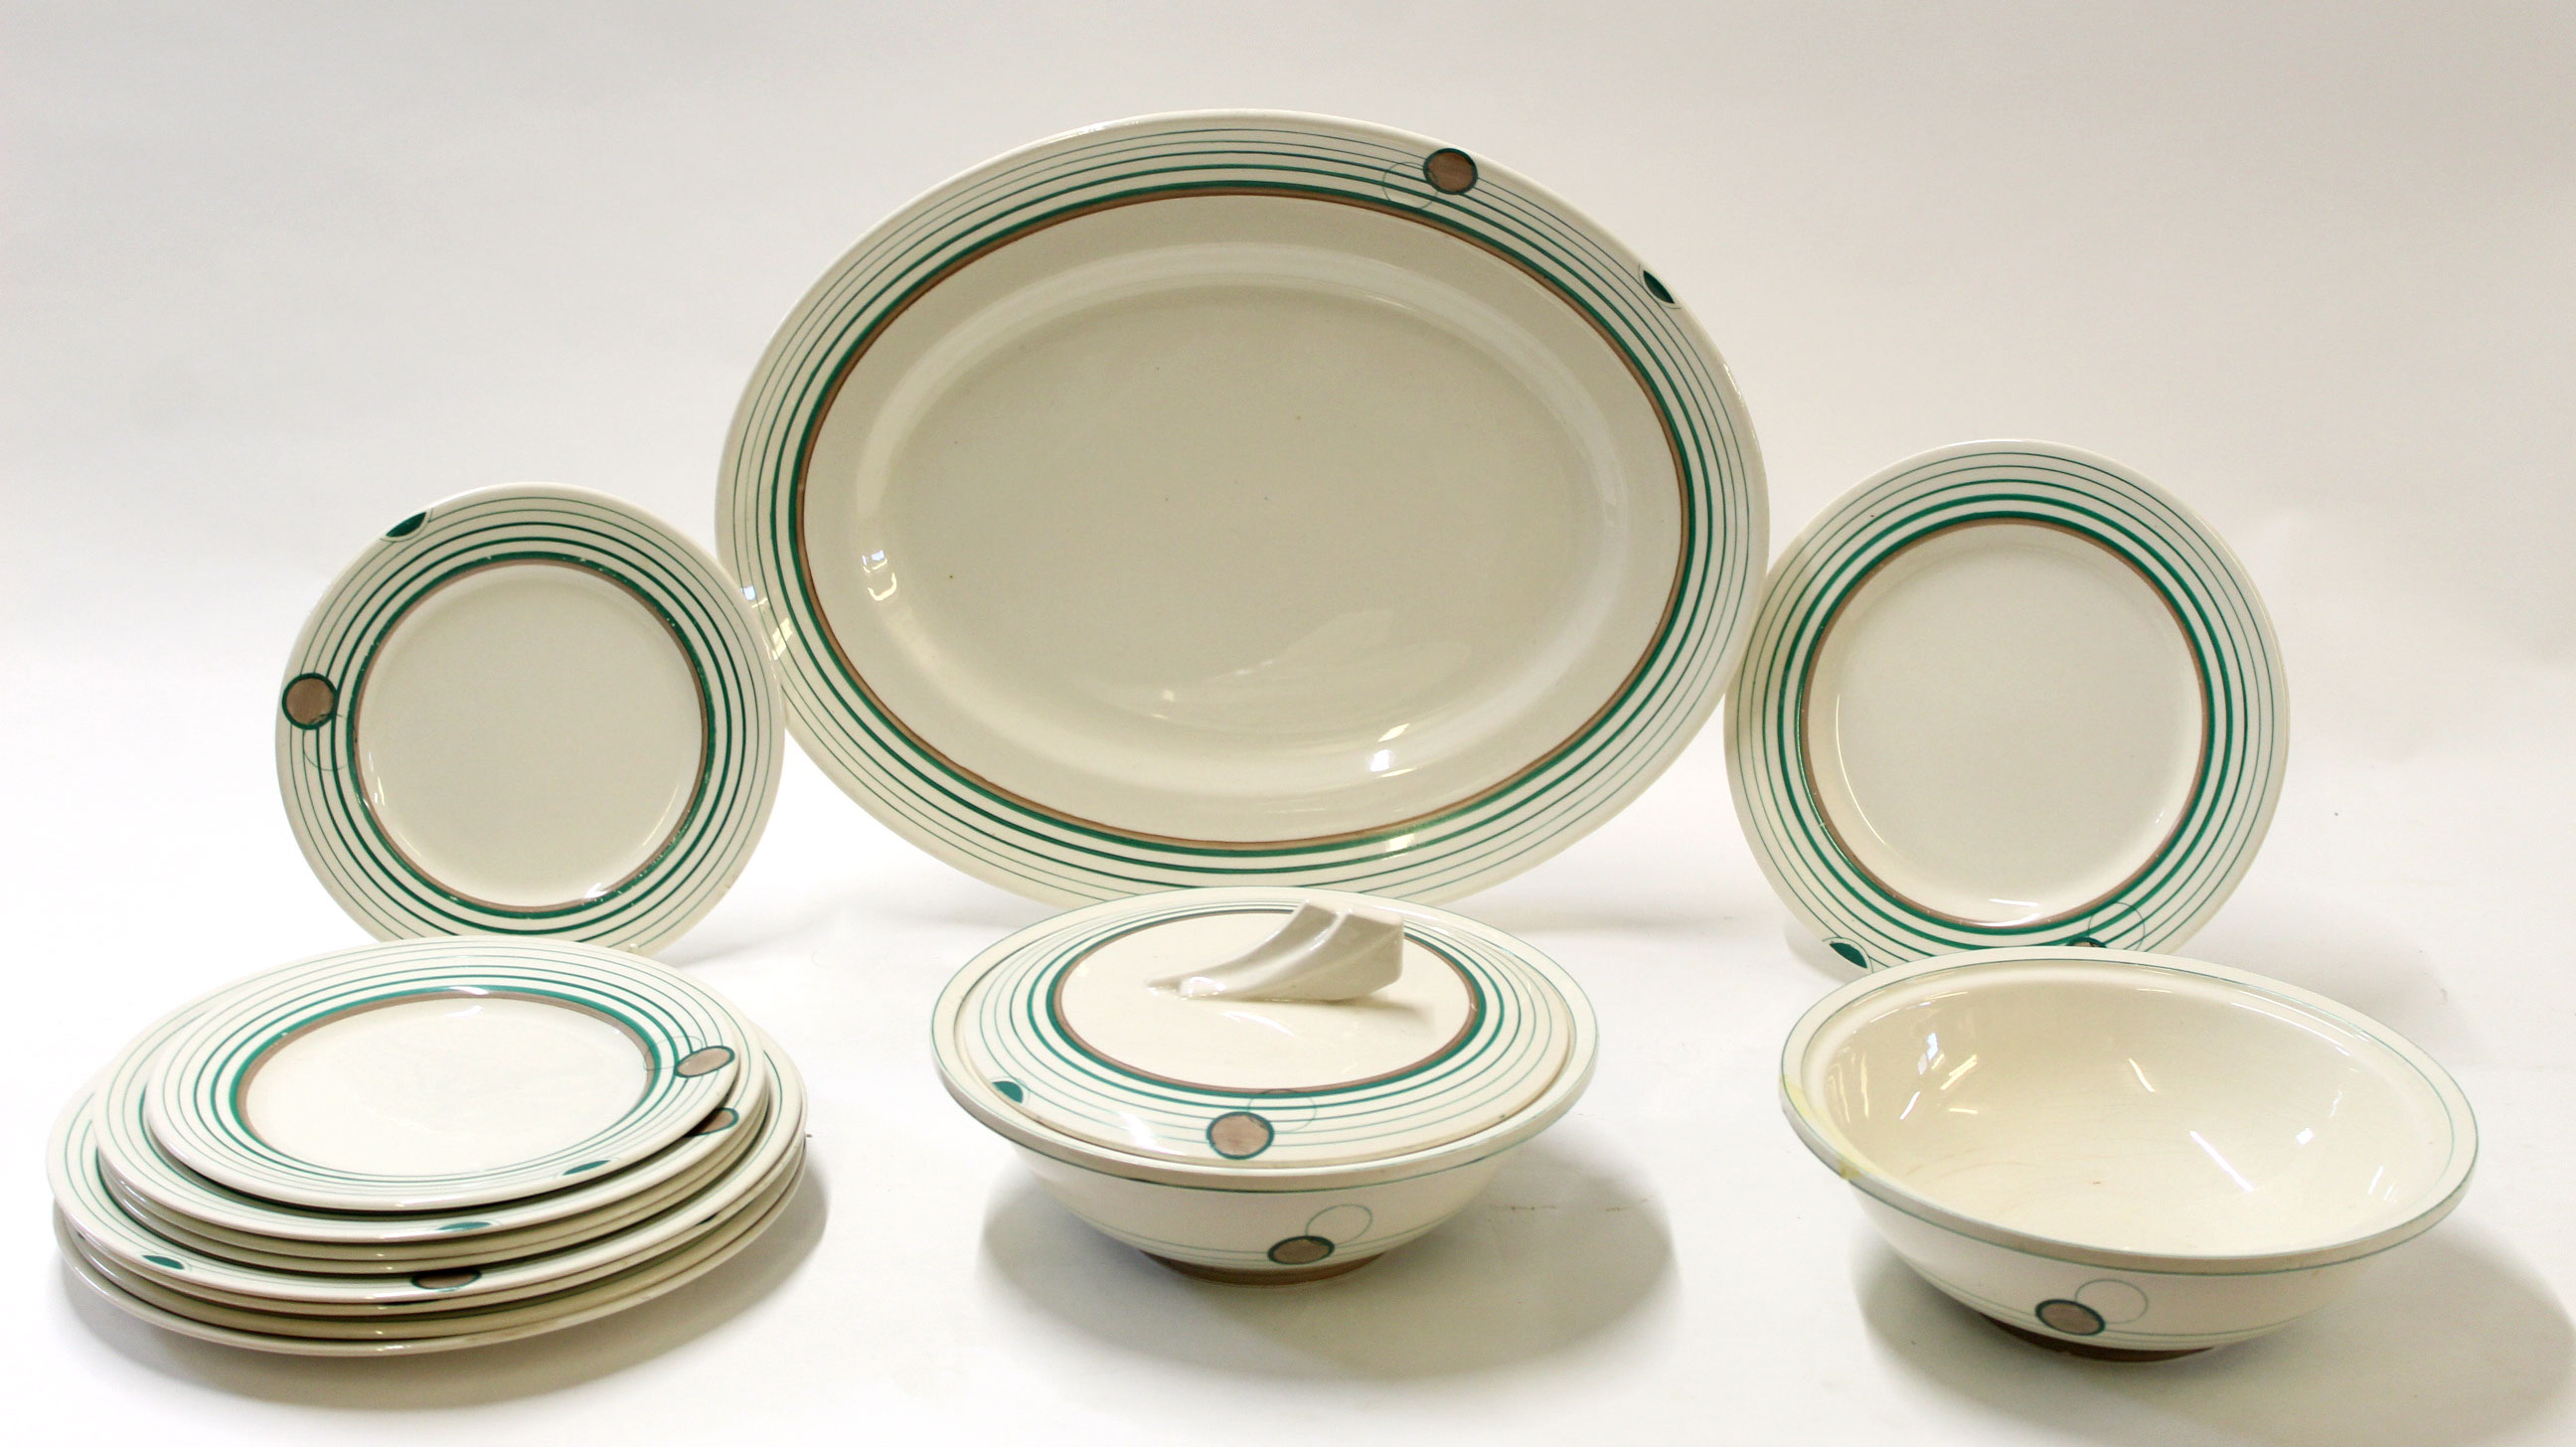 Group of Clarice Cliff dinner wares decorated with a green ringed geometric design comprising two